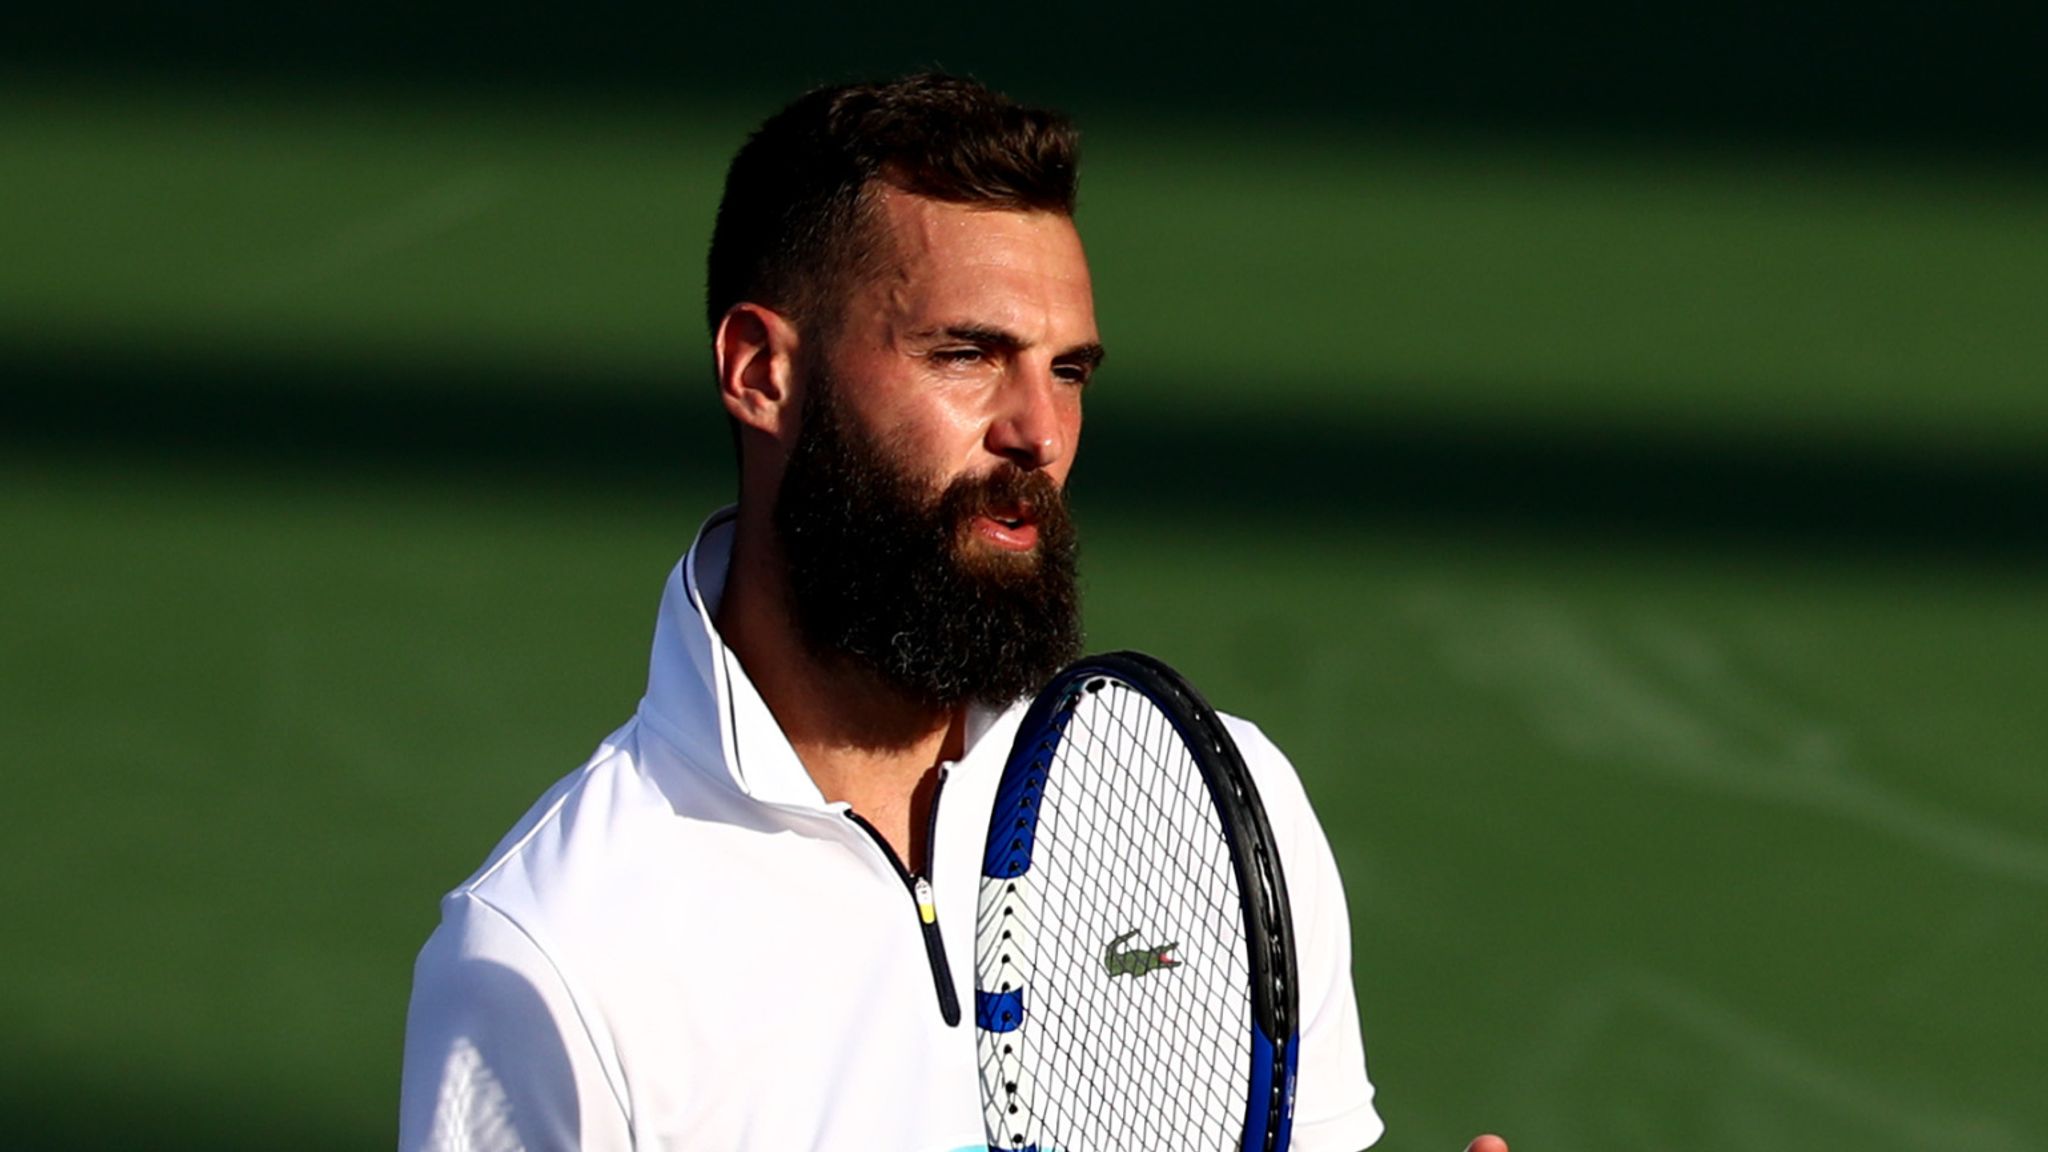 Coronavirus Benoit Paire withdrawn from US Open after positive test Tennis News Sky Sports